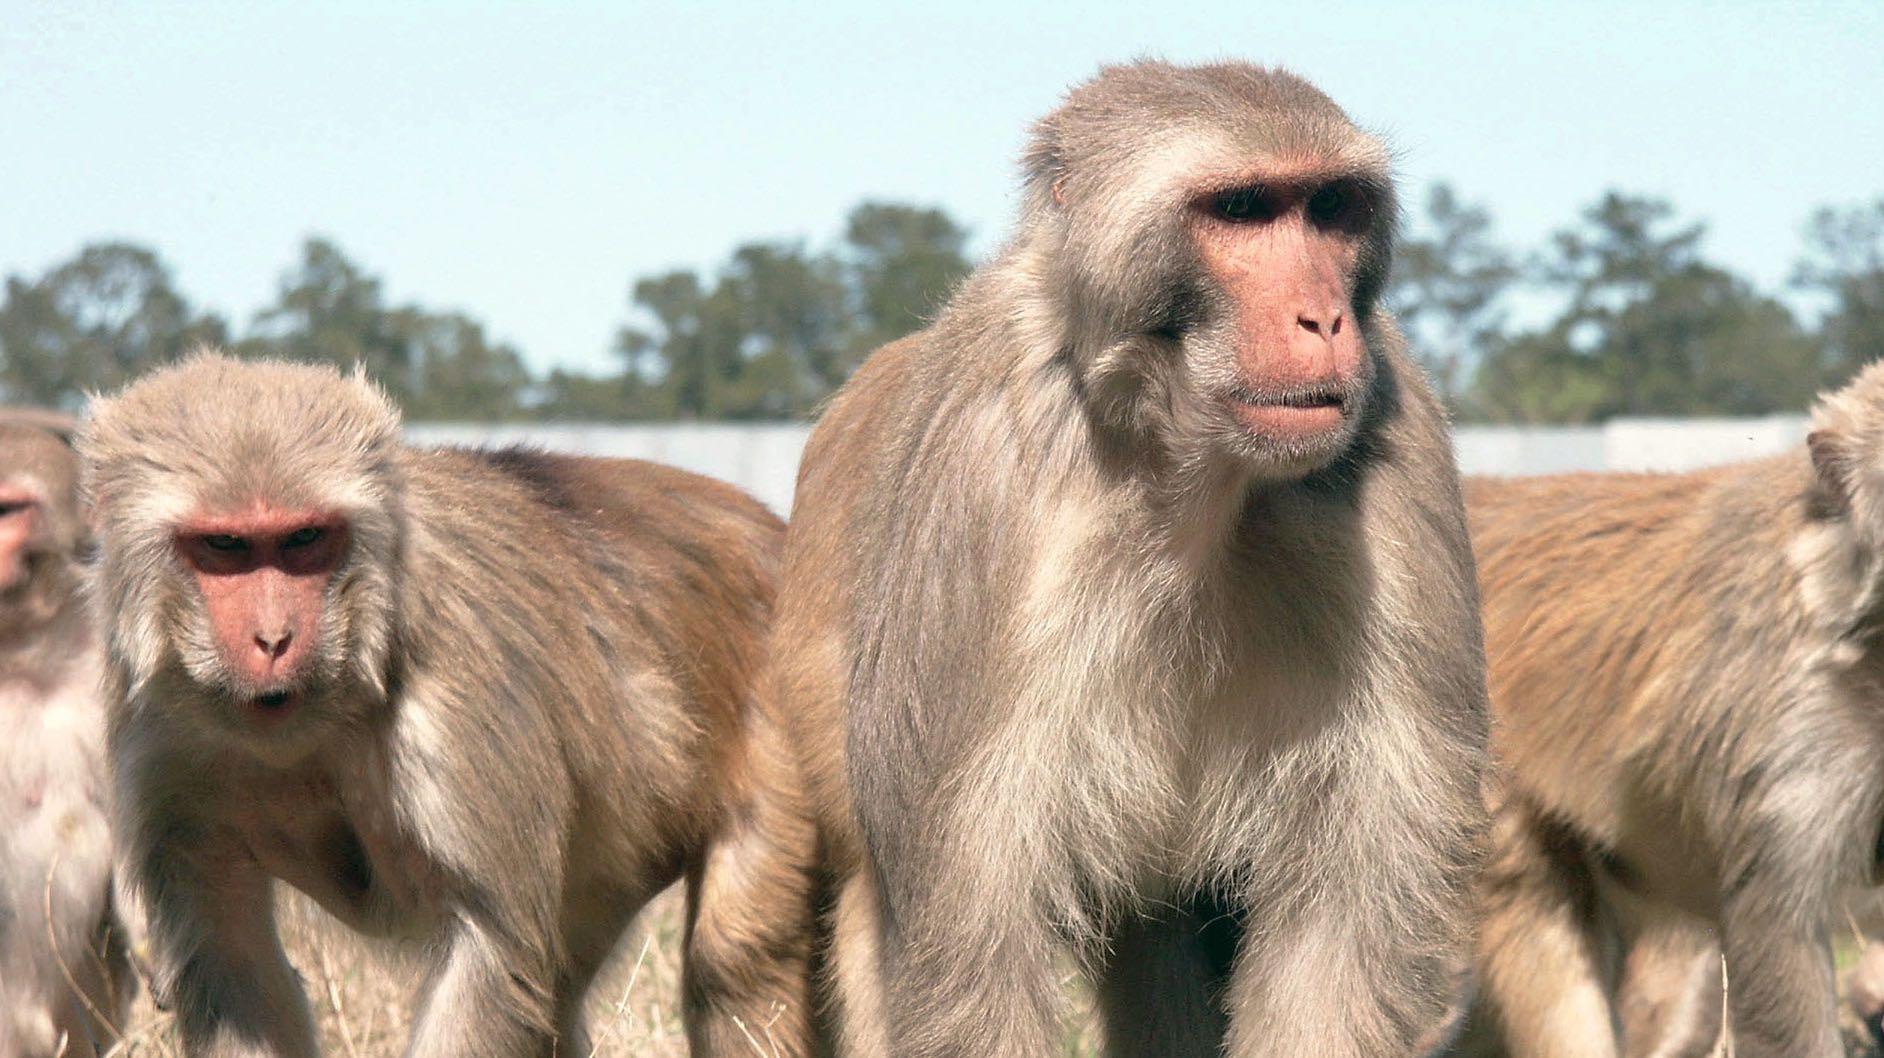 Aged male rhesus macaques monkeys at Tulane University are pictured. 